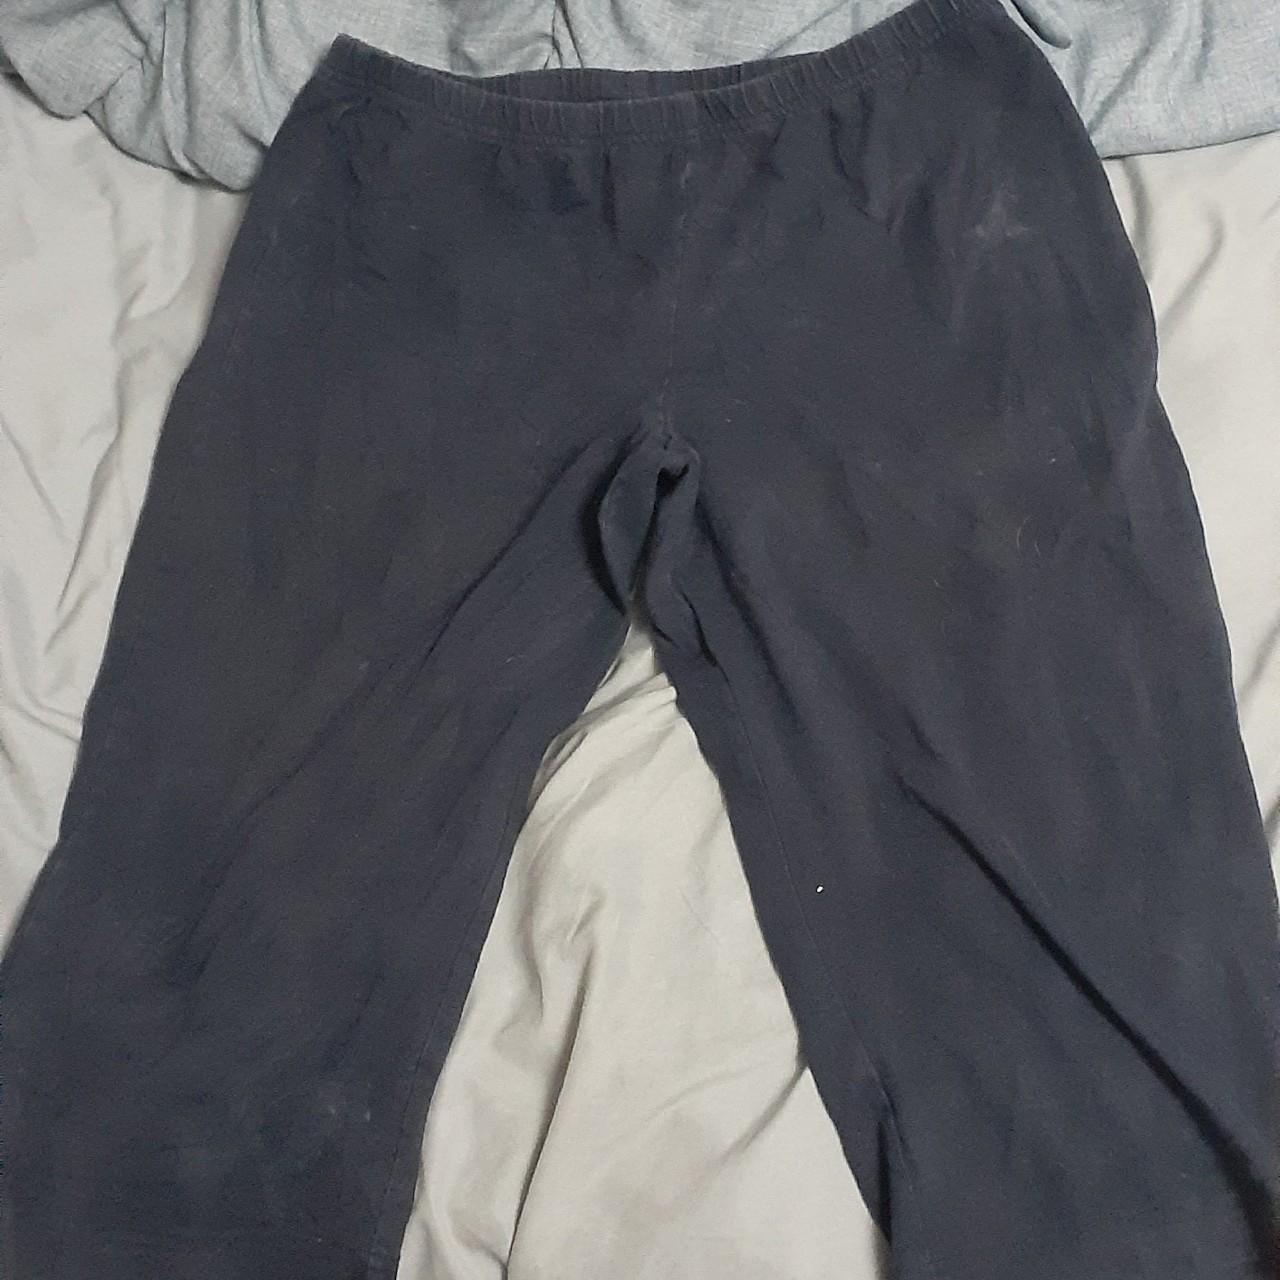 Basic editions navy blue leggings. No size tag, fits - Depop